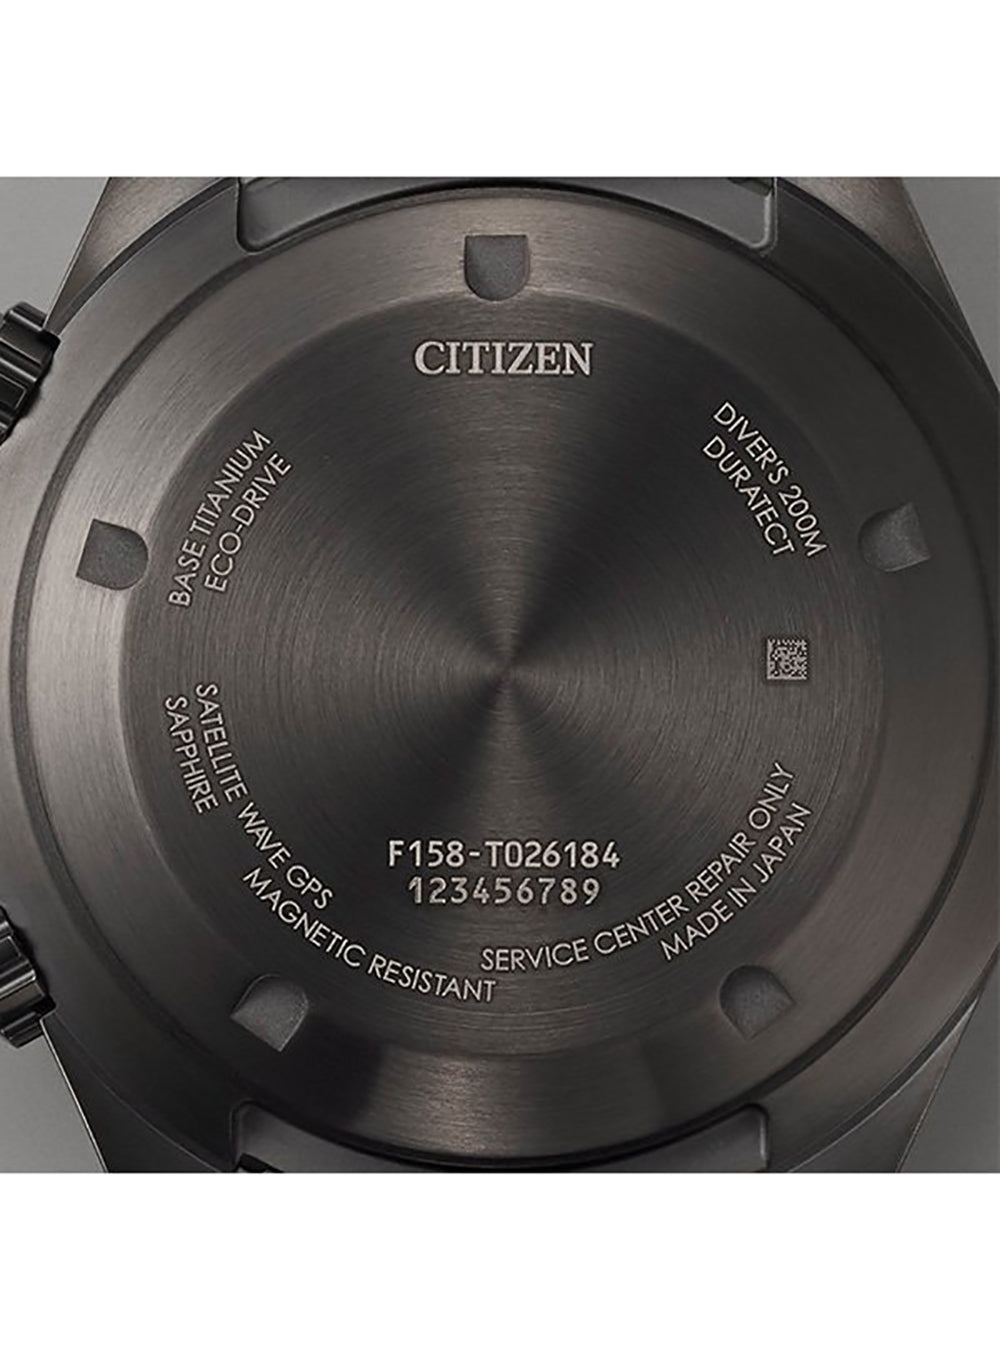 CITIZEN PROMASTER ECO-DRIVE SATELLITE WAVE GPS DIVER'S CC5006-06L MADE IN JAPAN JDMWRISTWATCHjapan-select